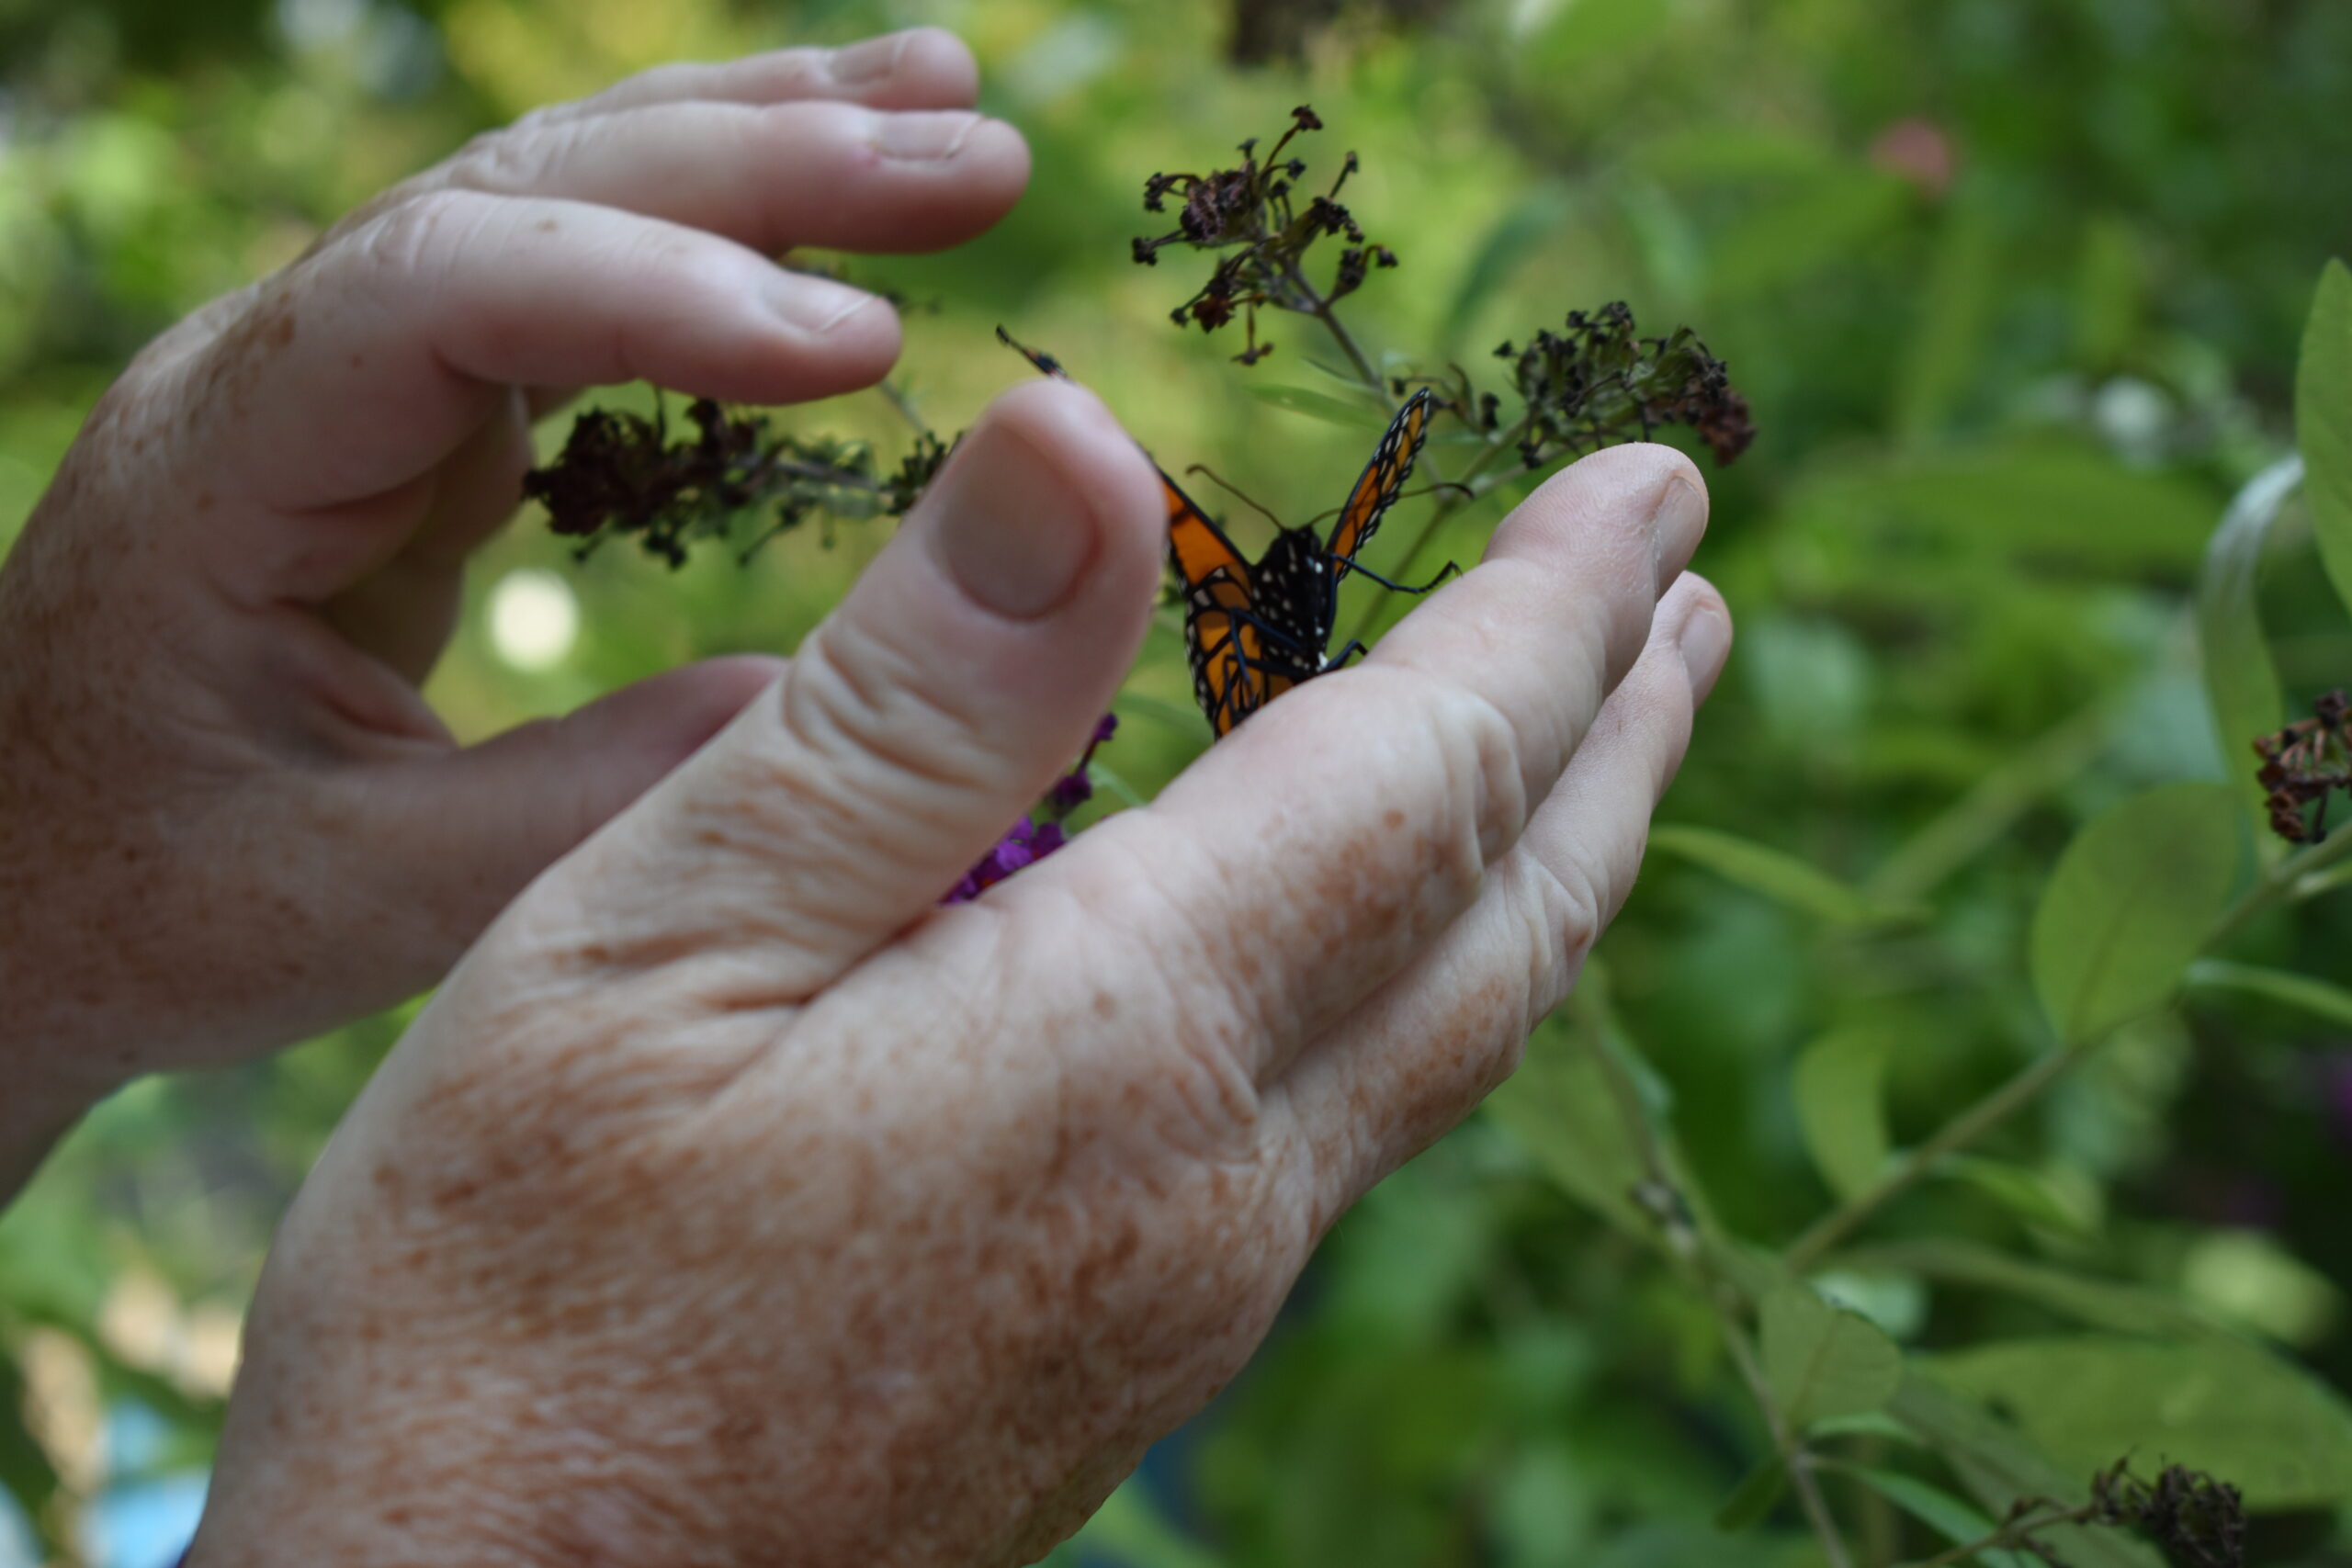 Mary Vienneau releases a monarch butterfly she raised. BRENDAN J. O'REILLY